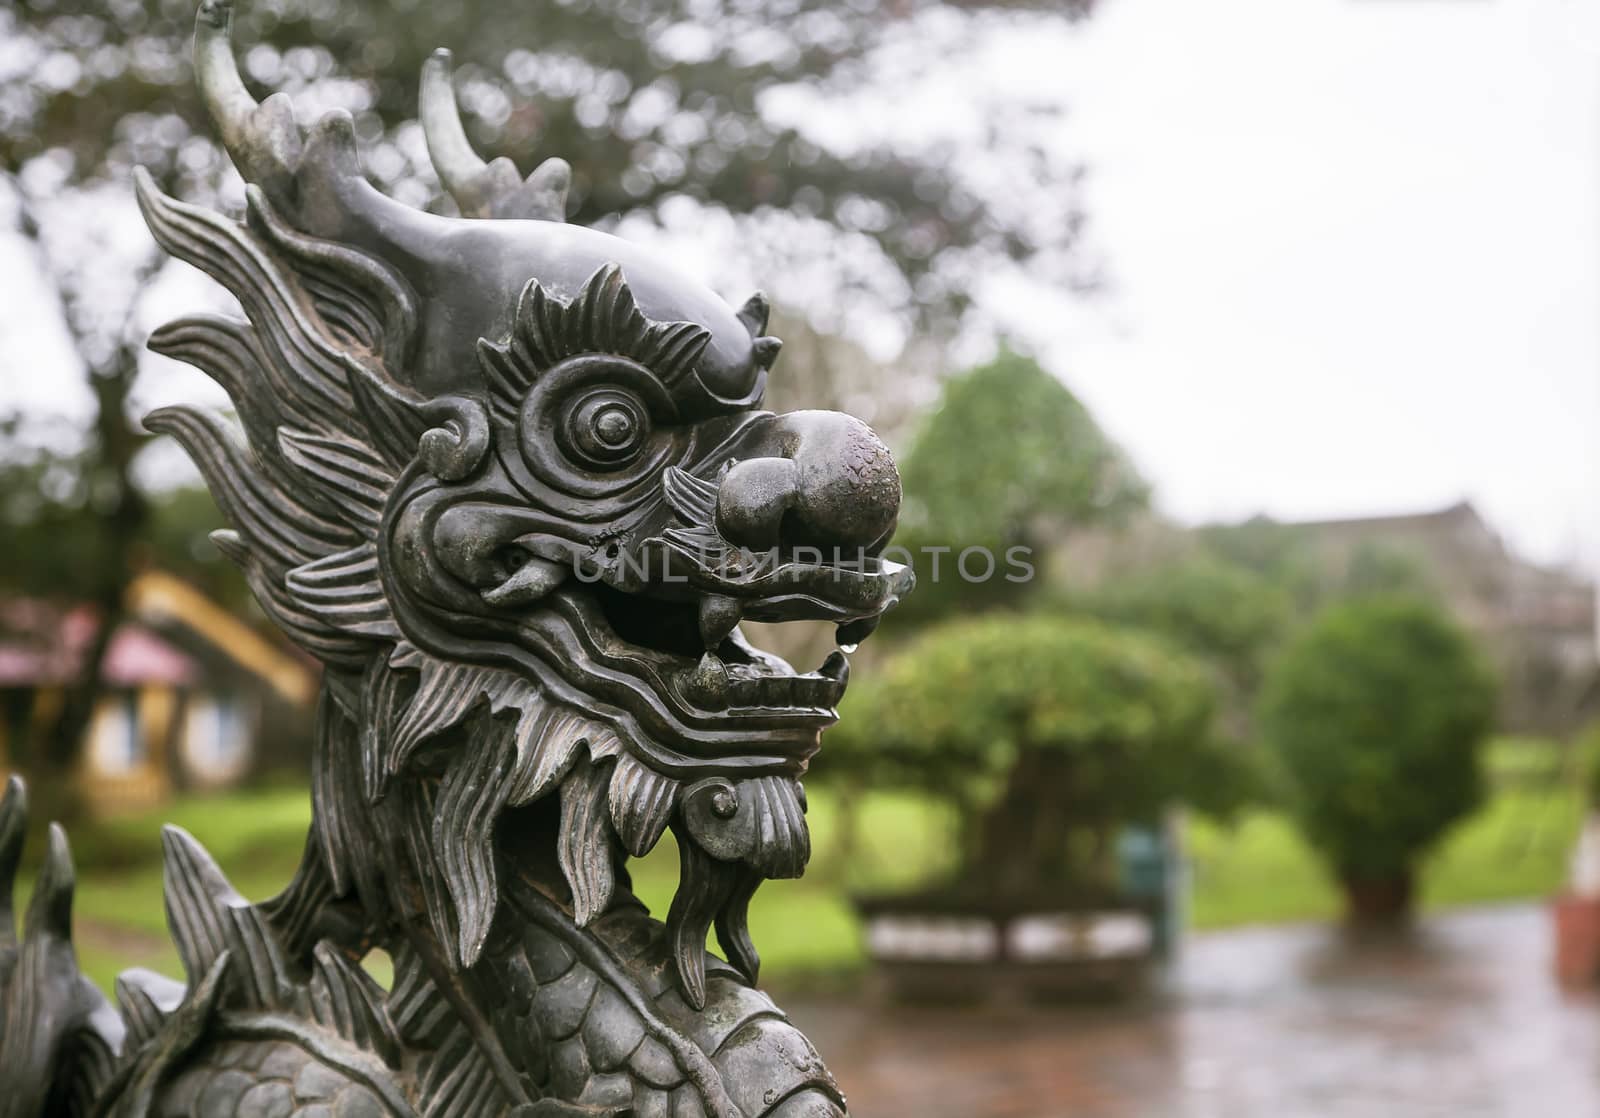 Dragon sculpture in Imperial City in Hue, Vietnam by Goodday